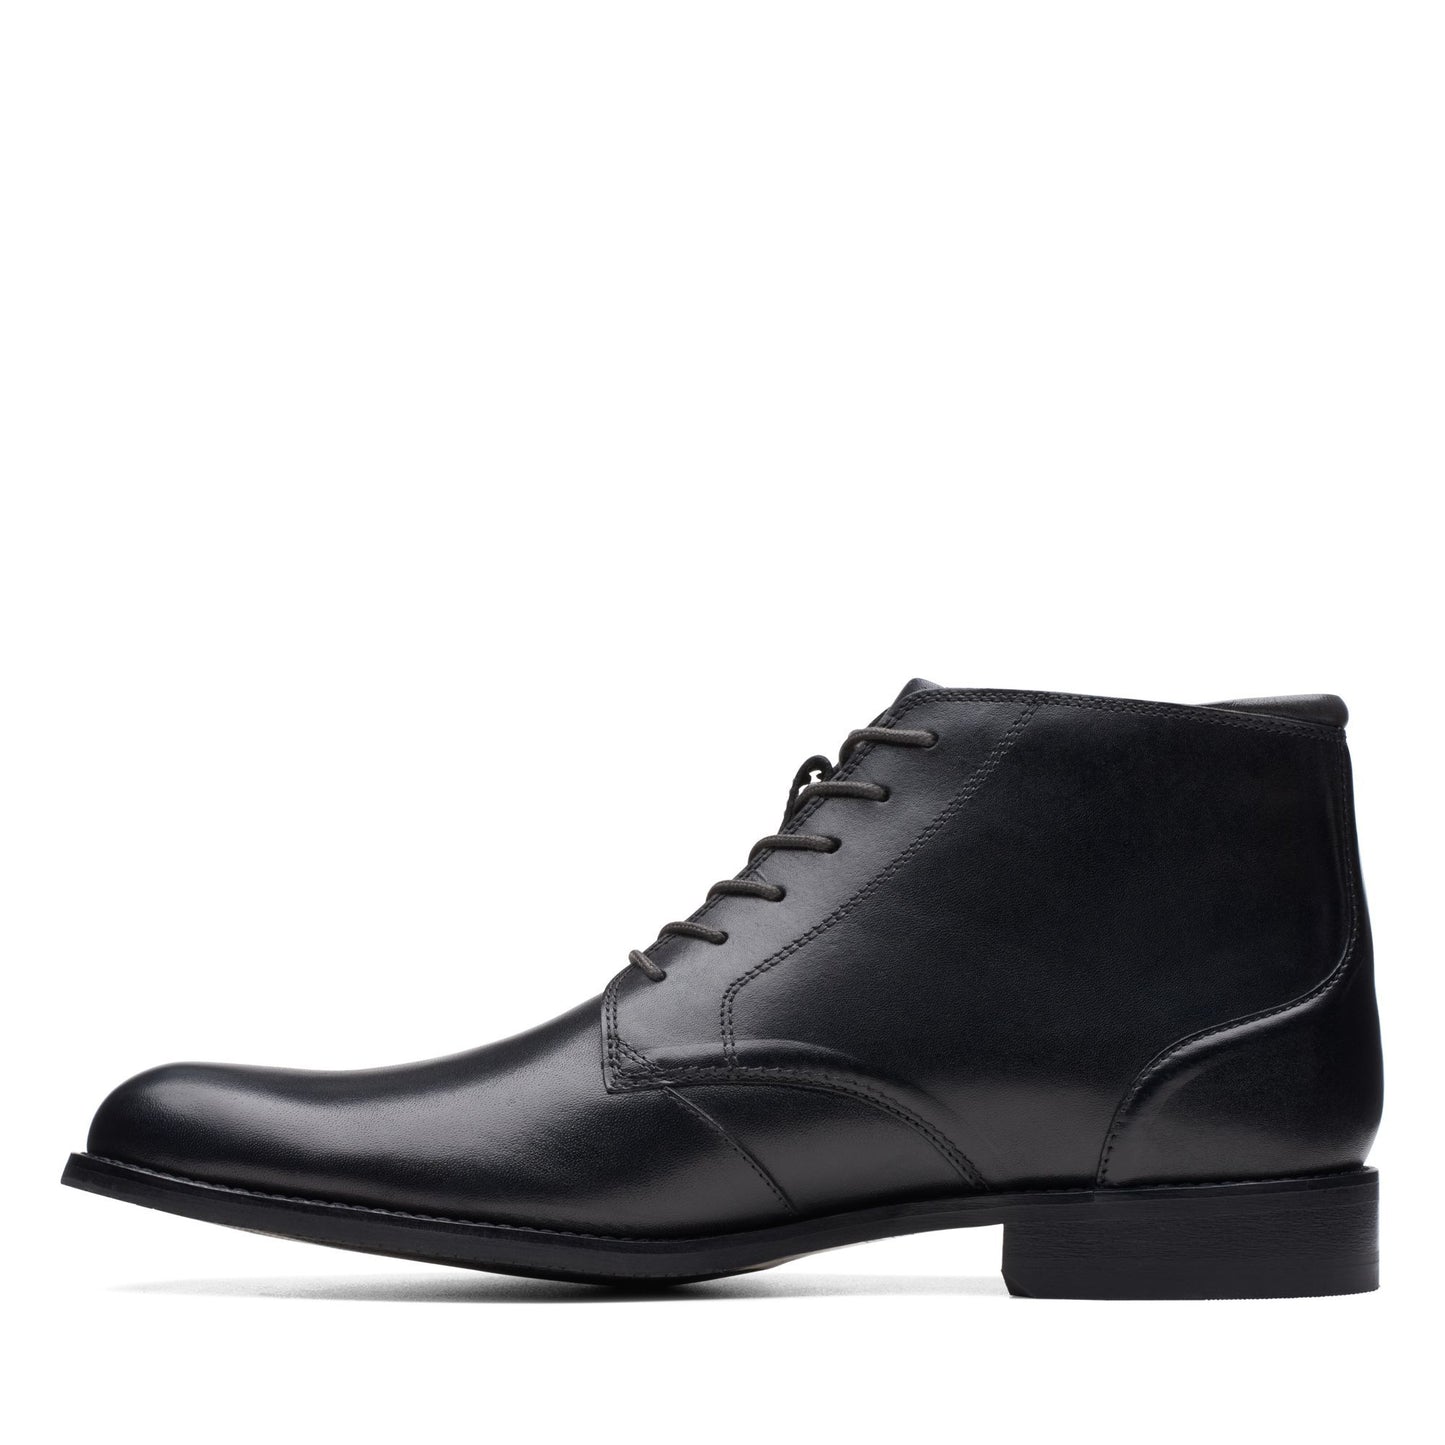 Clarks Craft Arlo Hi Ankle Boots Black leather